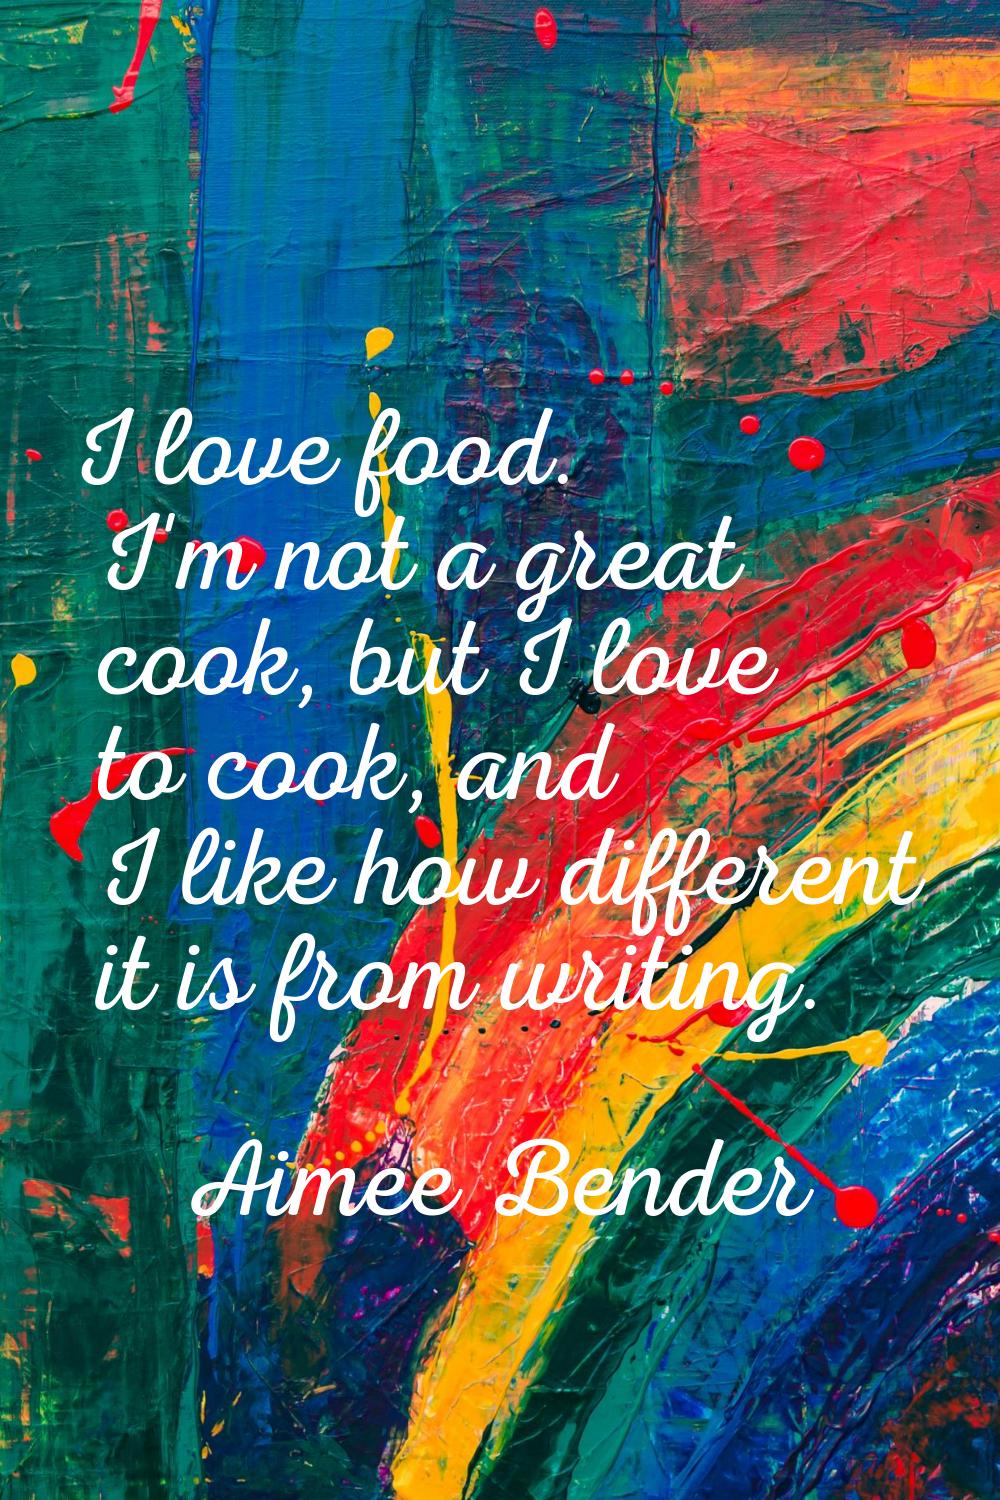 I love food. I'm not a great cook, but I love to cook, and I like how different it is from writing.